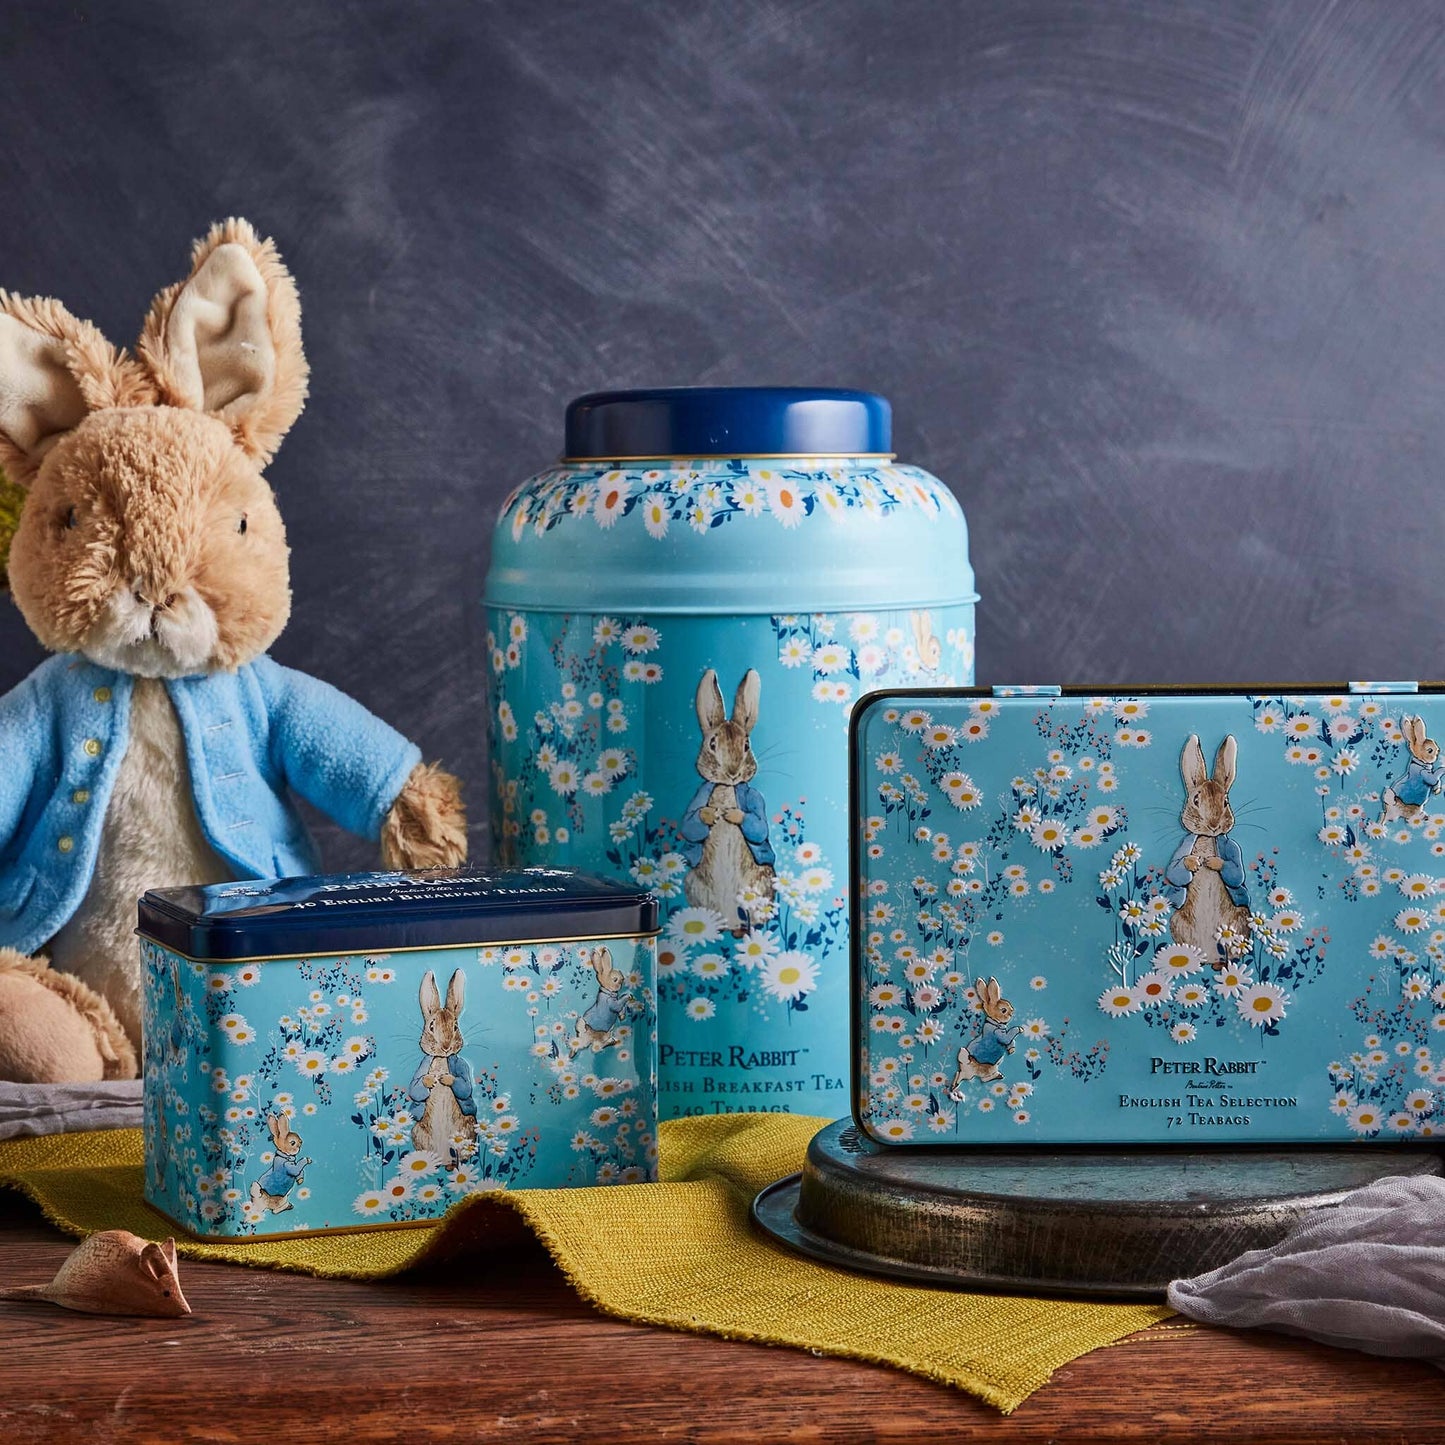 Peter Rabbit Gift Set with Tea Caddy and Plush Toy - New English Teas